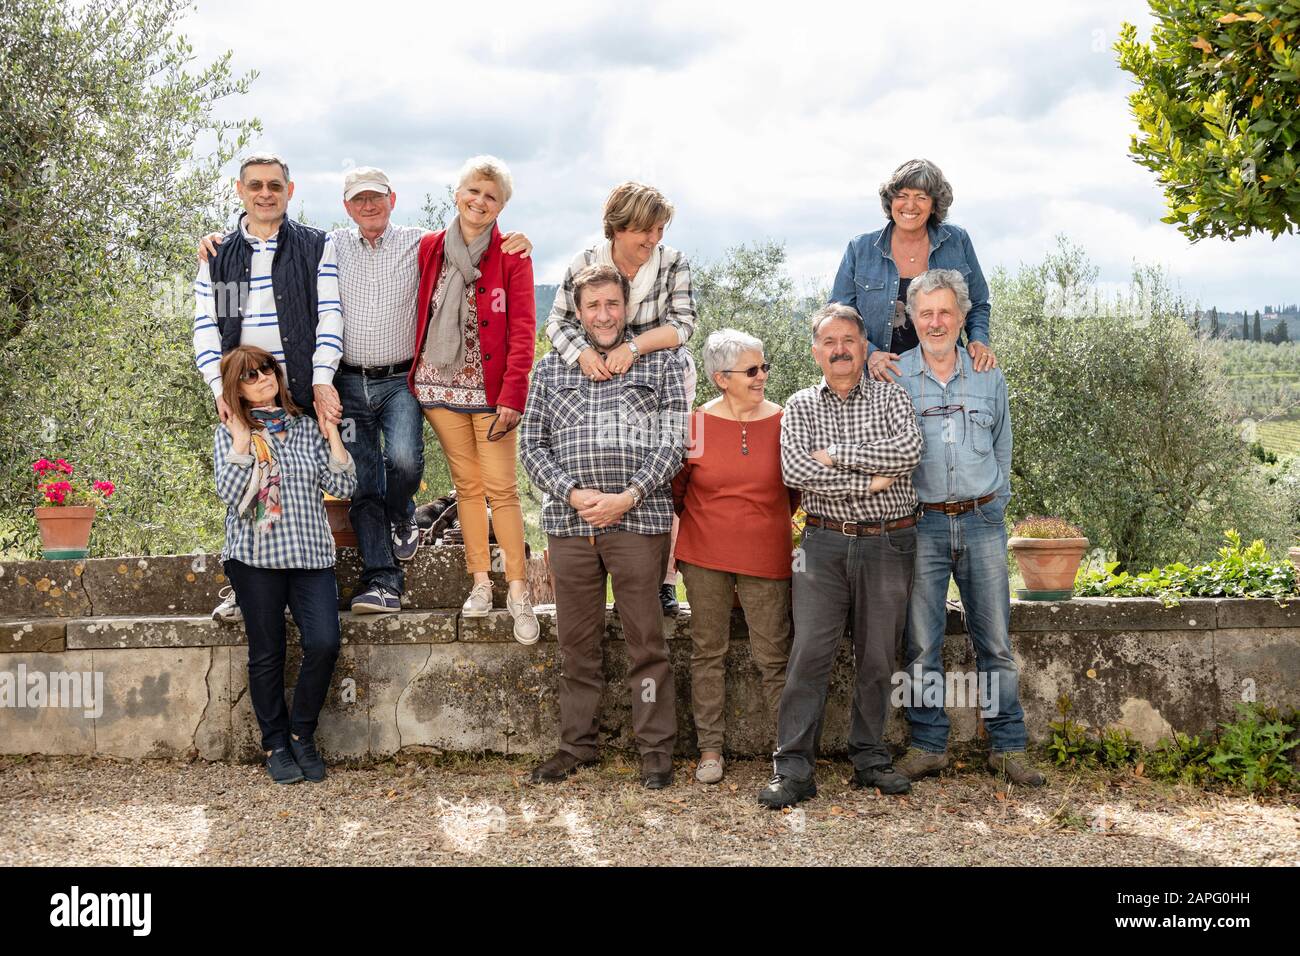 Portrait of senior couples, olive trees in background, Florence, Italy Stock Photo